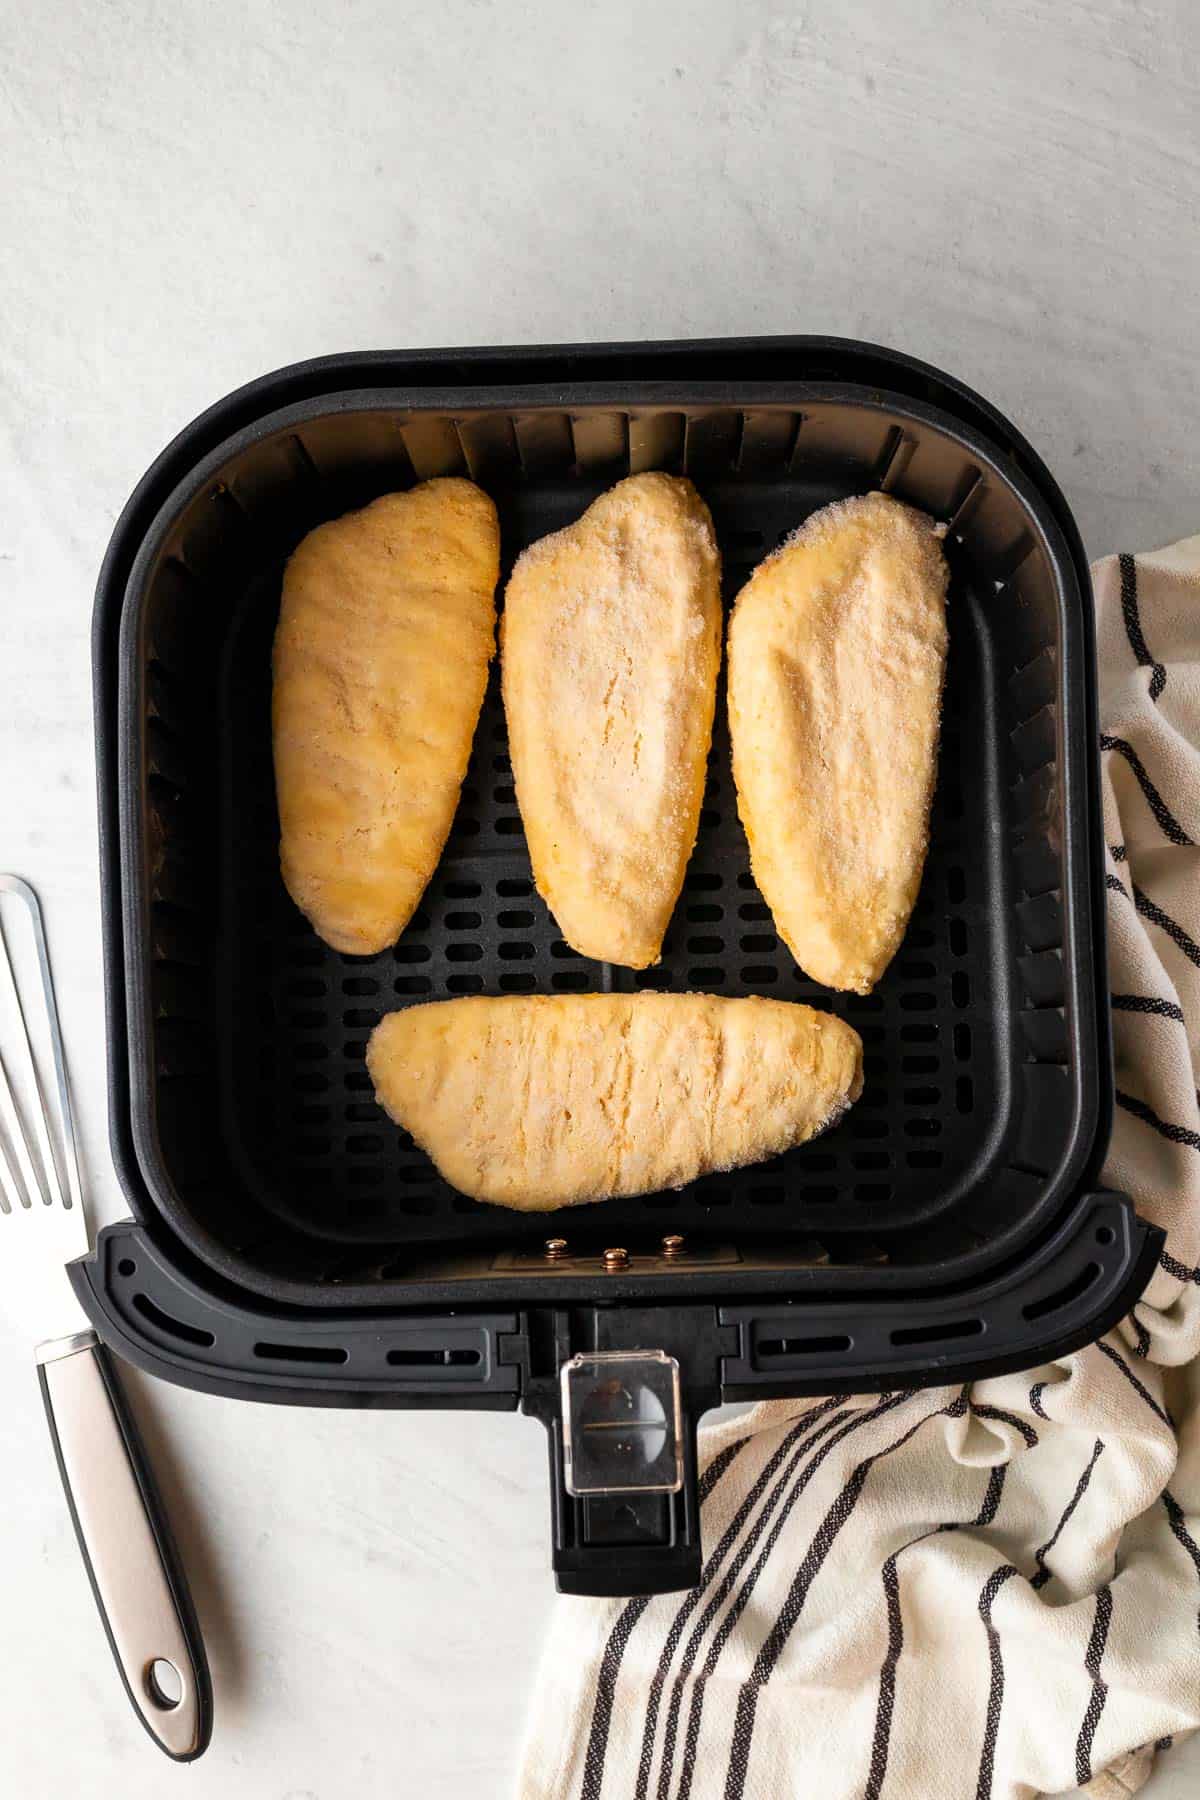 frozen fish fillets in the air fryer basket before cooking with a fish spatula and decorative cloth on either side of the air fryer basket